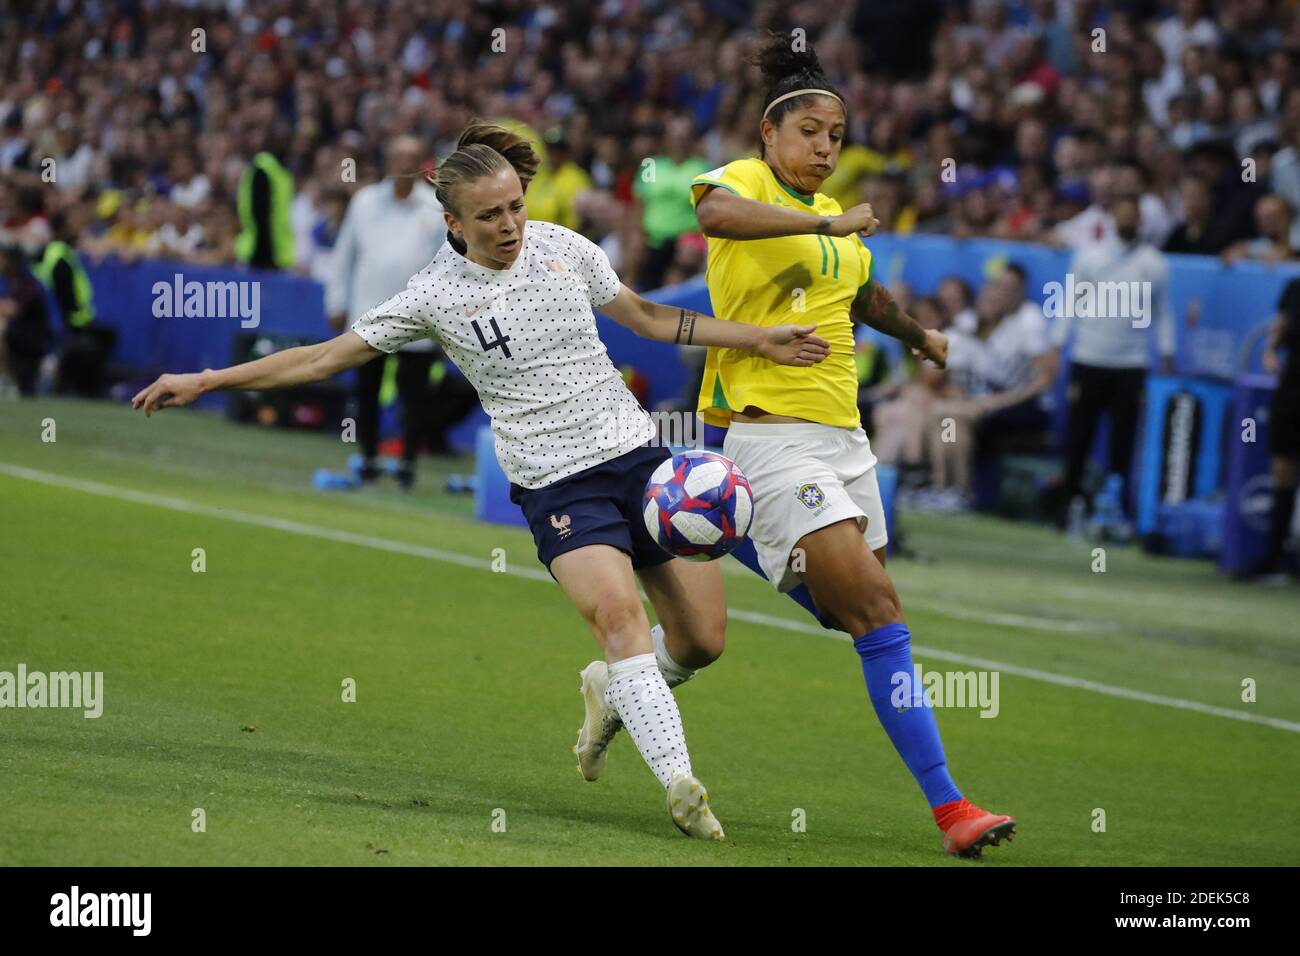 France's Manon Torrent battling Brazil's Cristiane during FIFA Women's World Cup France group A match France v Brazil on June 23, 2019 in Le Havre, France. France won 2-1 after extra time reaching quarter-finals. Photo by Henri Szwarc/ABACAPRESS.COM Stock Photo